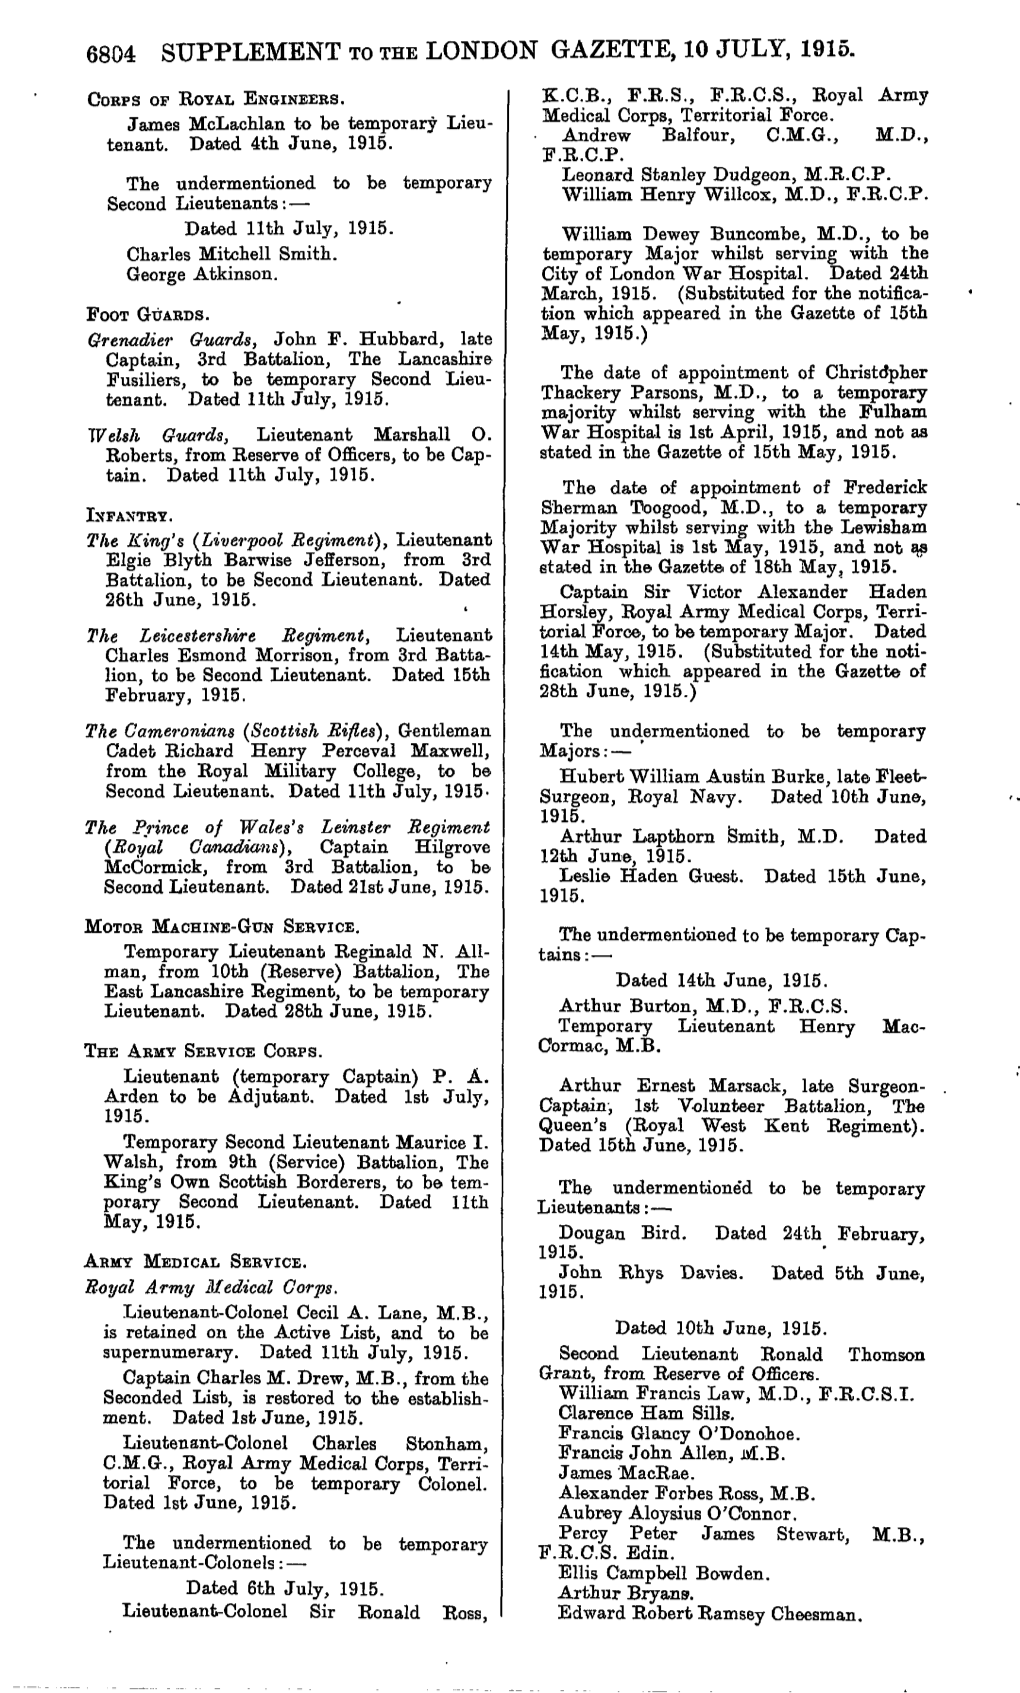 6804 Supplement to the London Gazette, 10 July, 1915